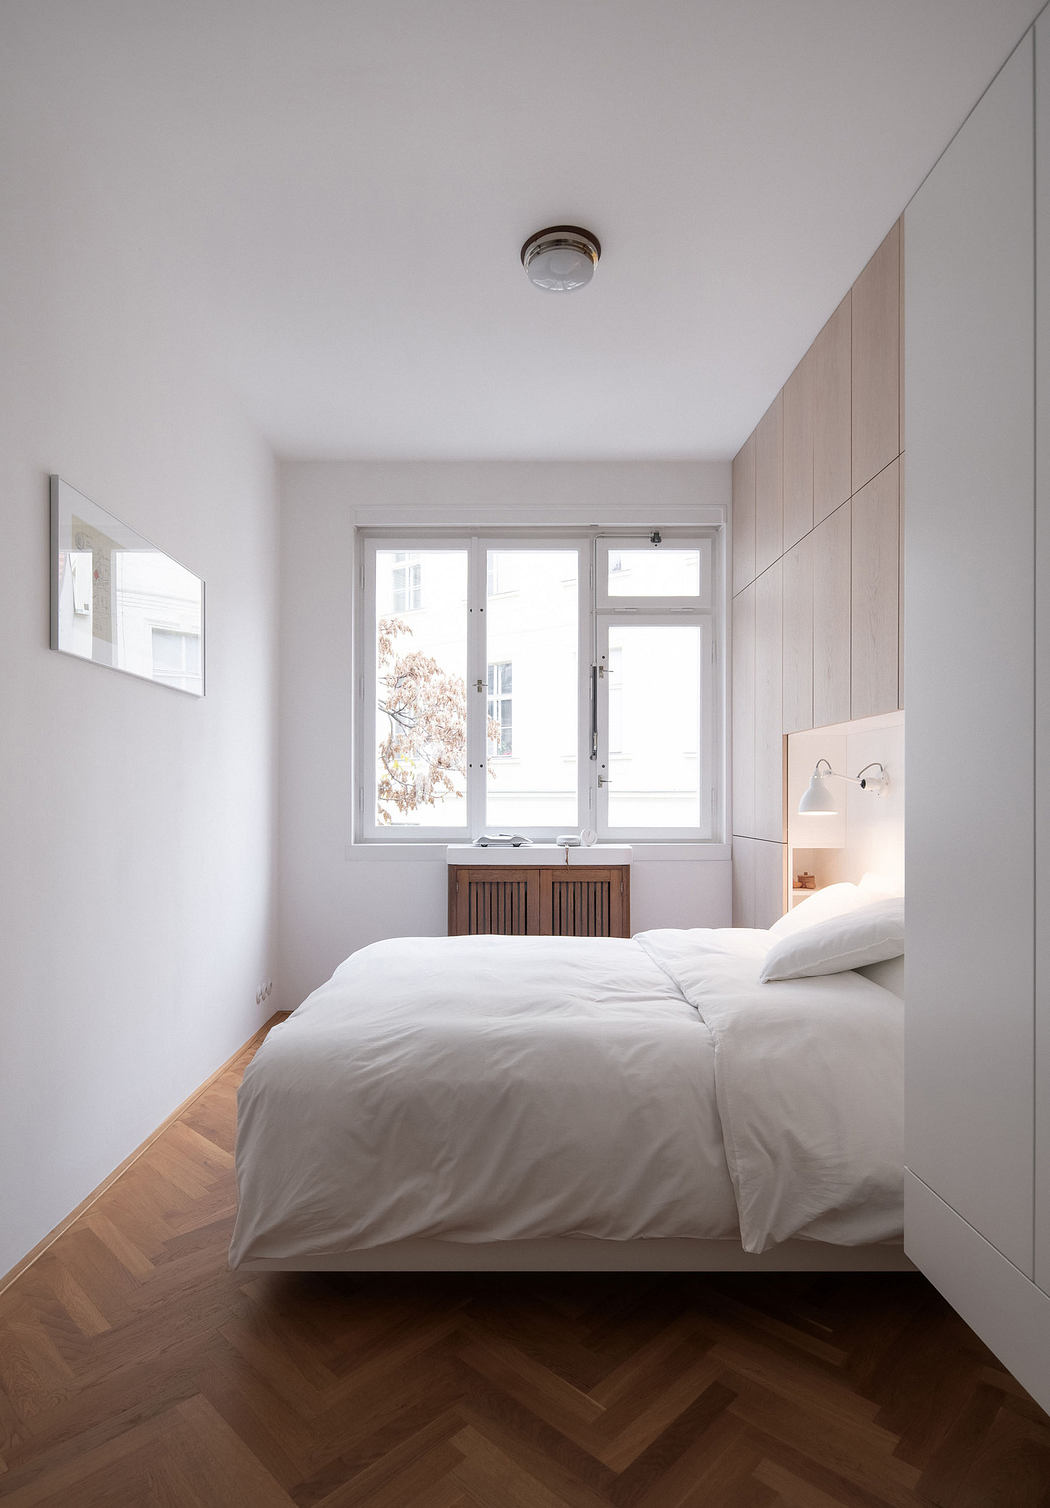 Minimalist bedroom with wooden floor, white bedding, and built-in cabinets.